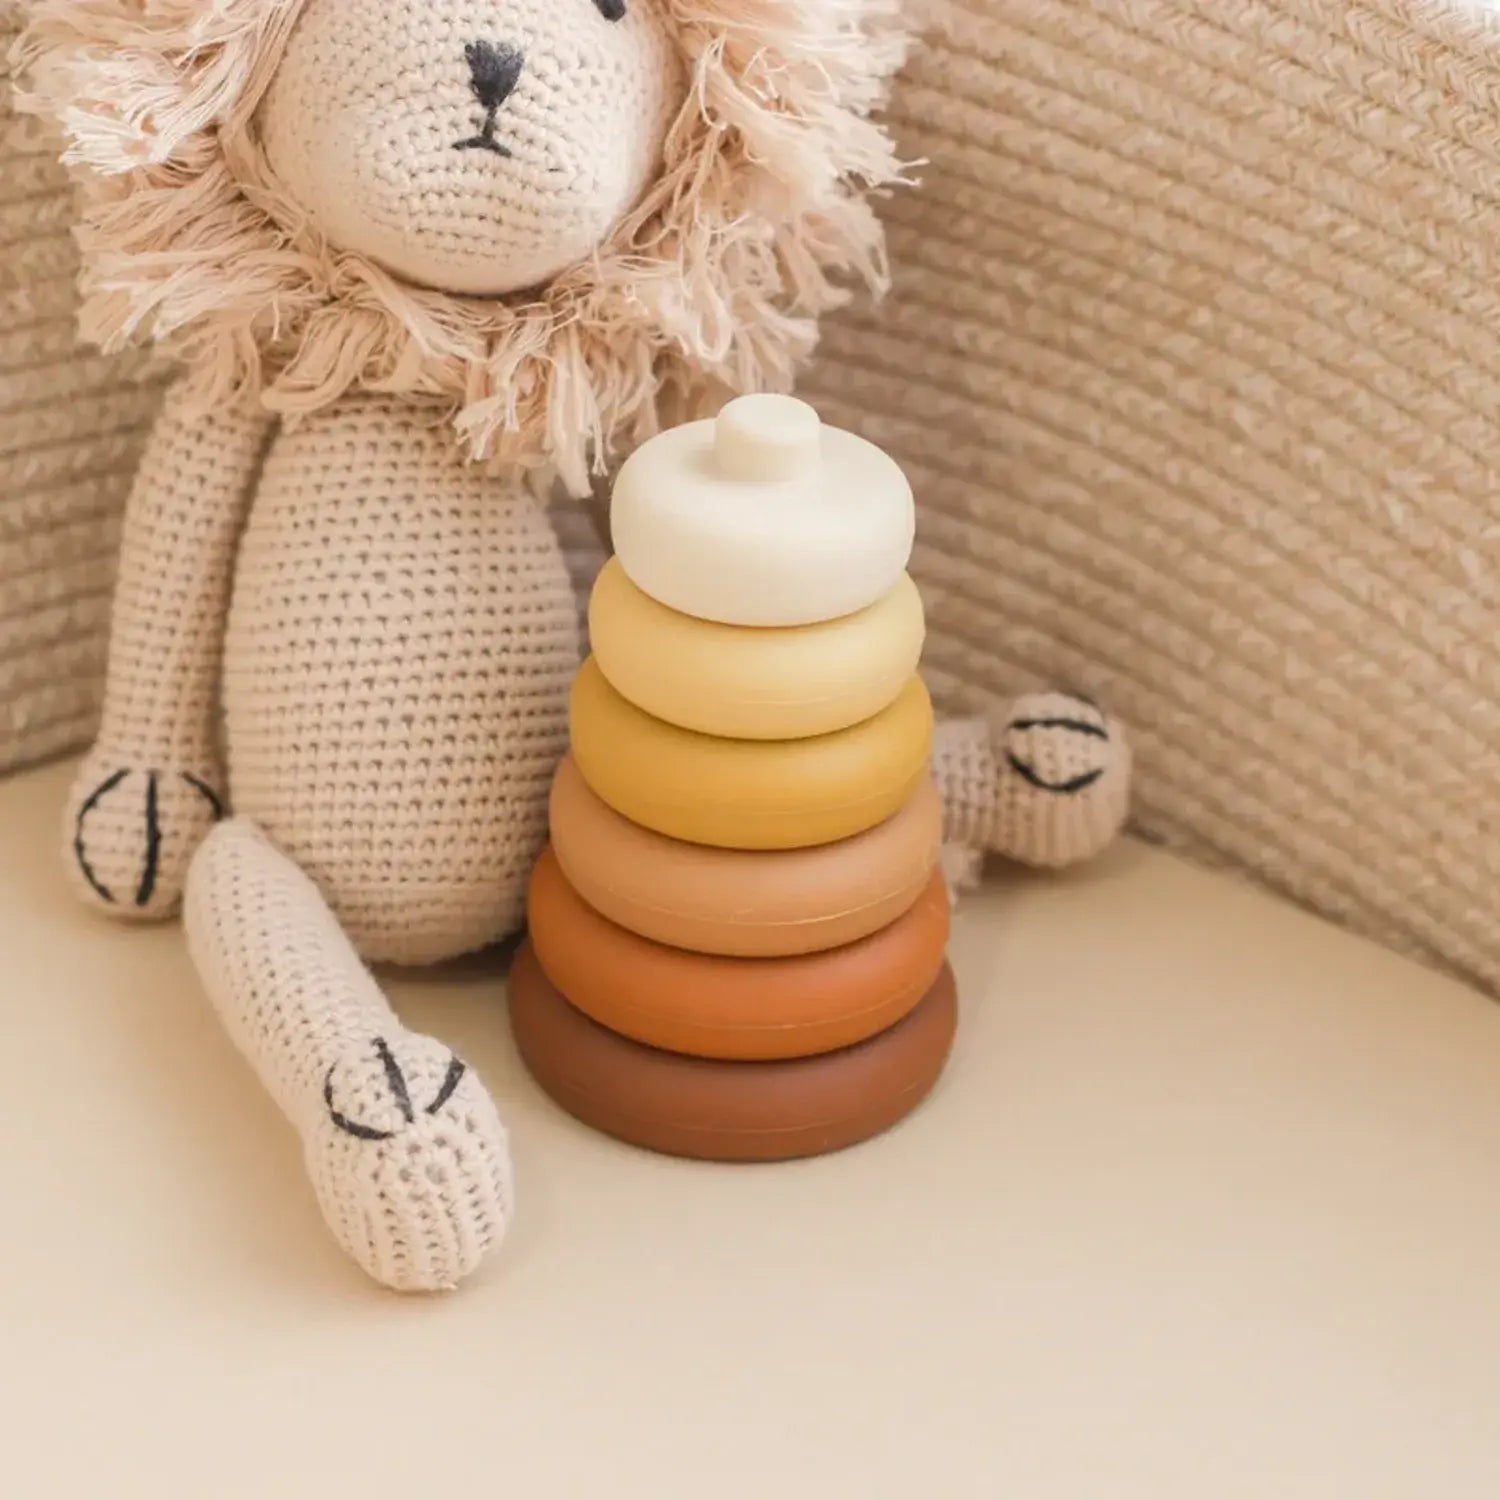 Round Stacking Teething Tower Toy by Kiin